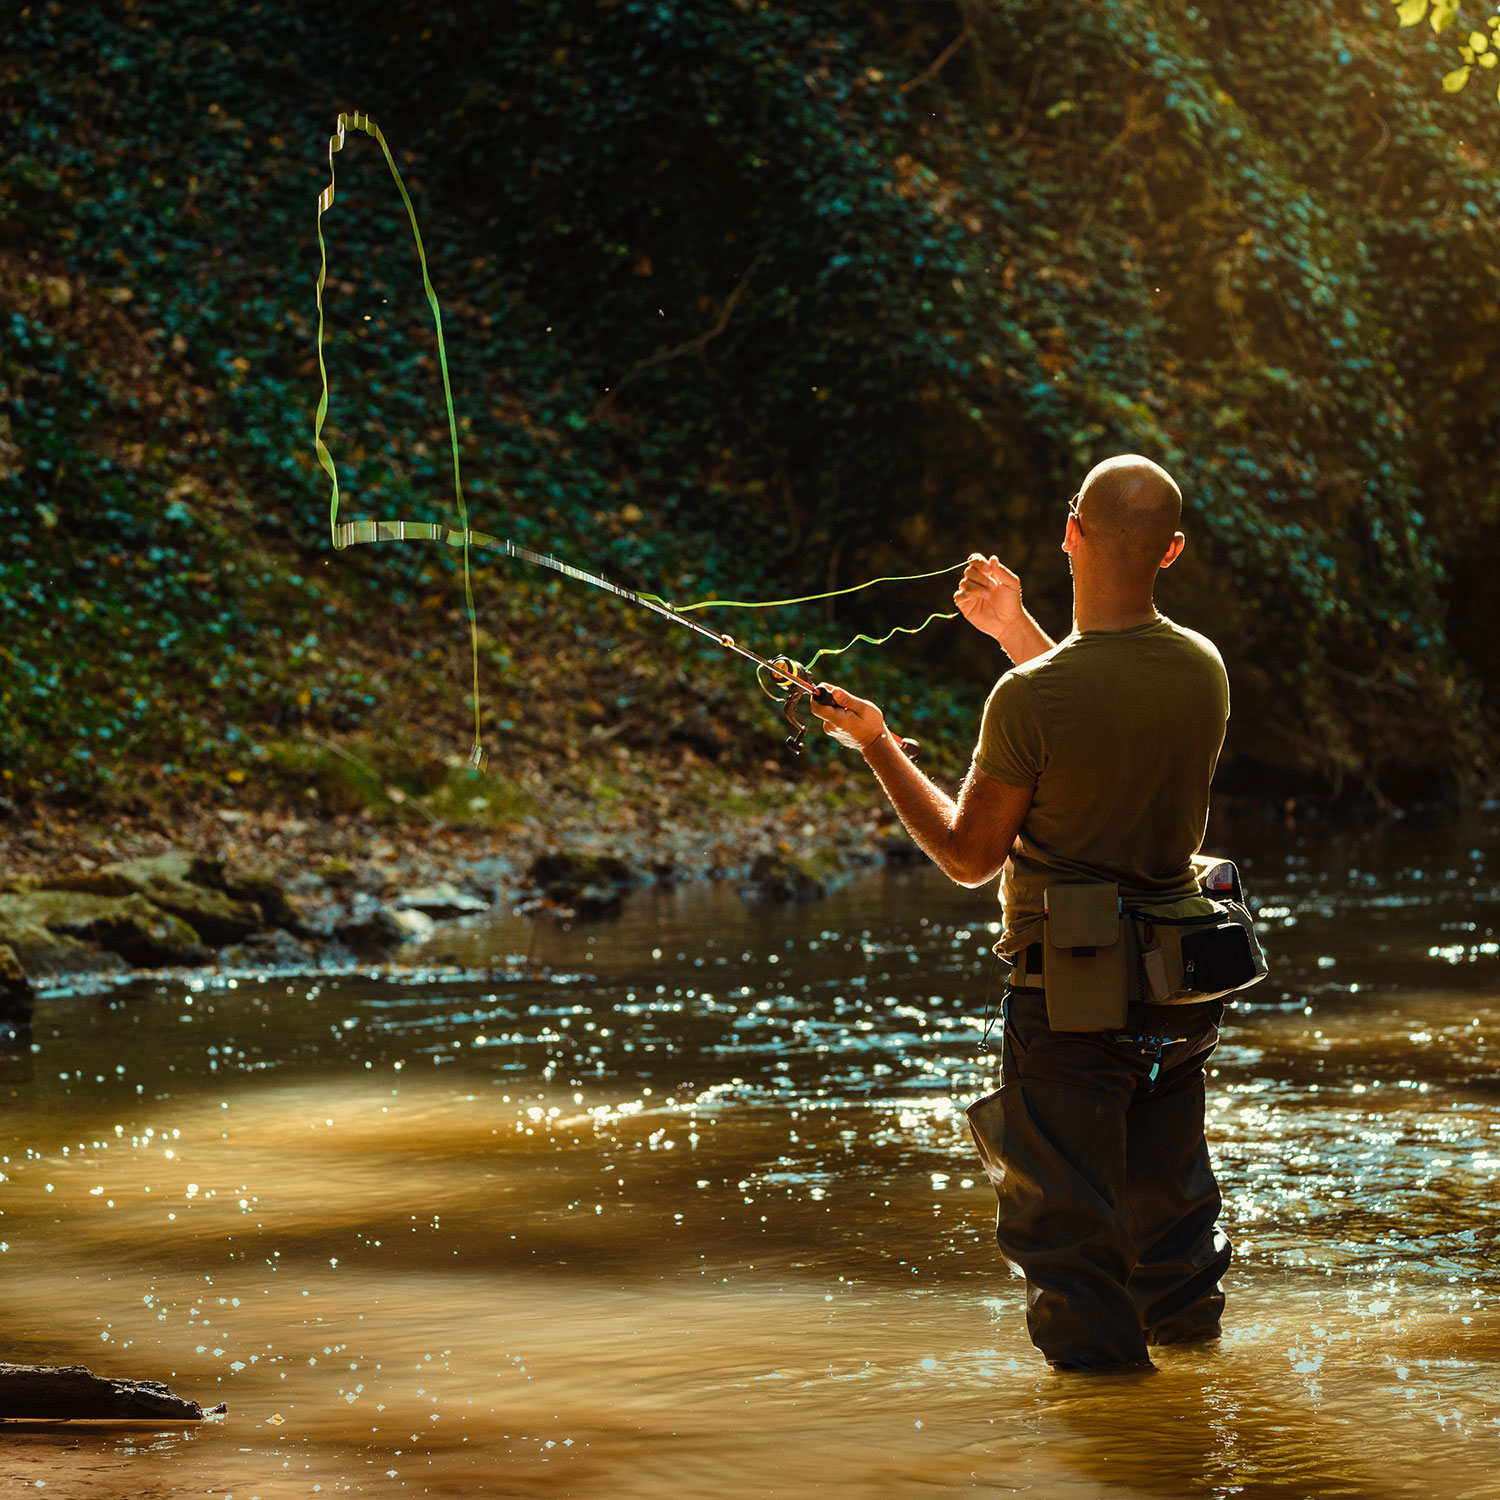 A fisherman casting his rod while almost knee deep in the Caney Creek River.